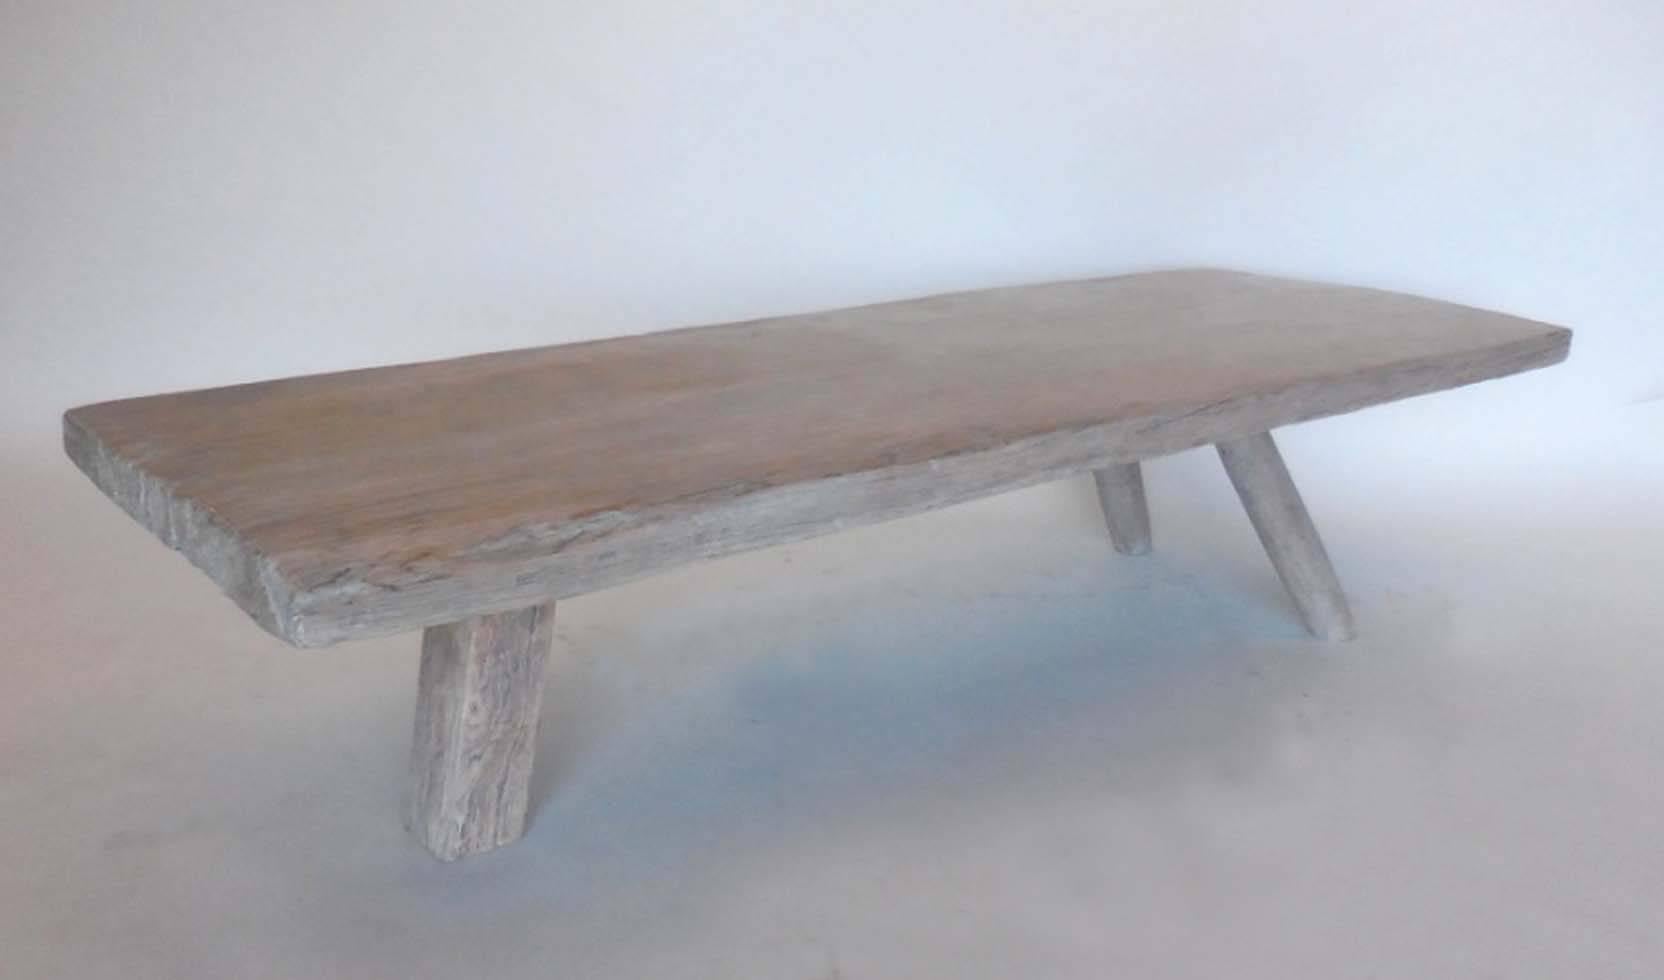 19th century, one wide wood plank sitting atop three legs. One leg is rectangular and the others are cylindrical. Nice pale white waxed finish. Antique, hand hewn surface, very smooth natural patina.